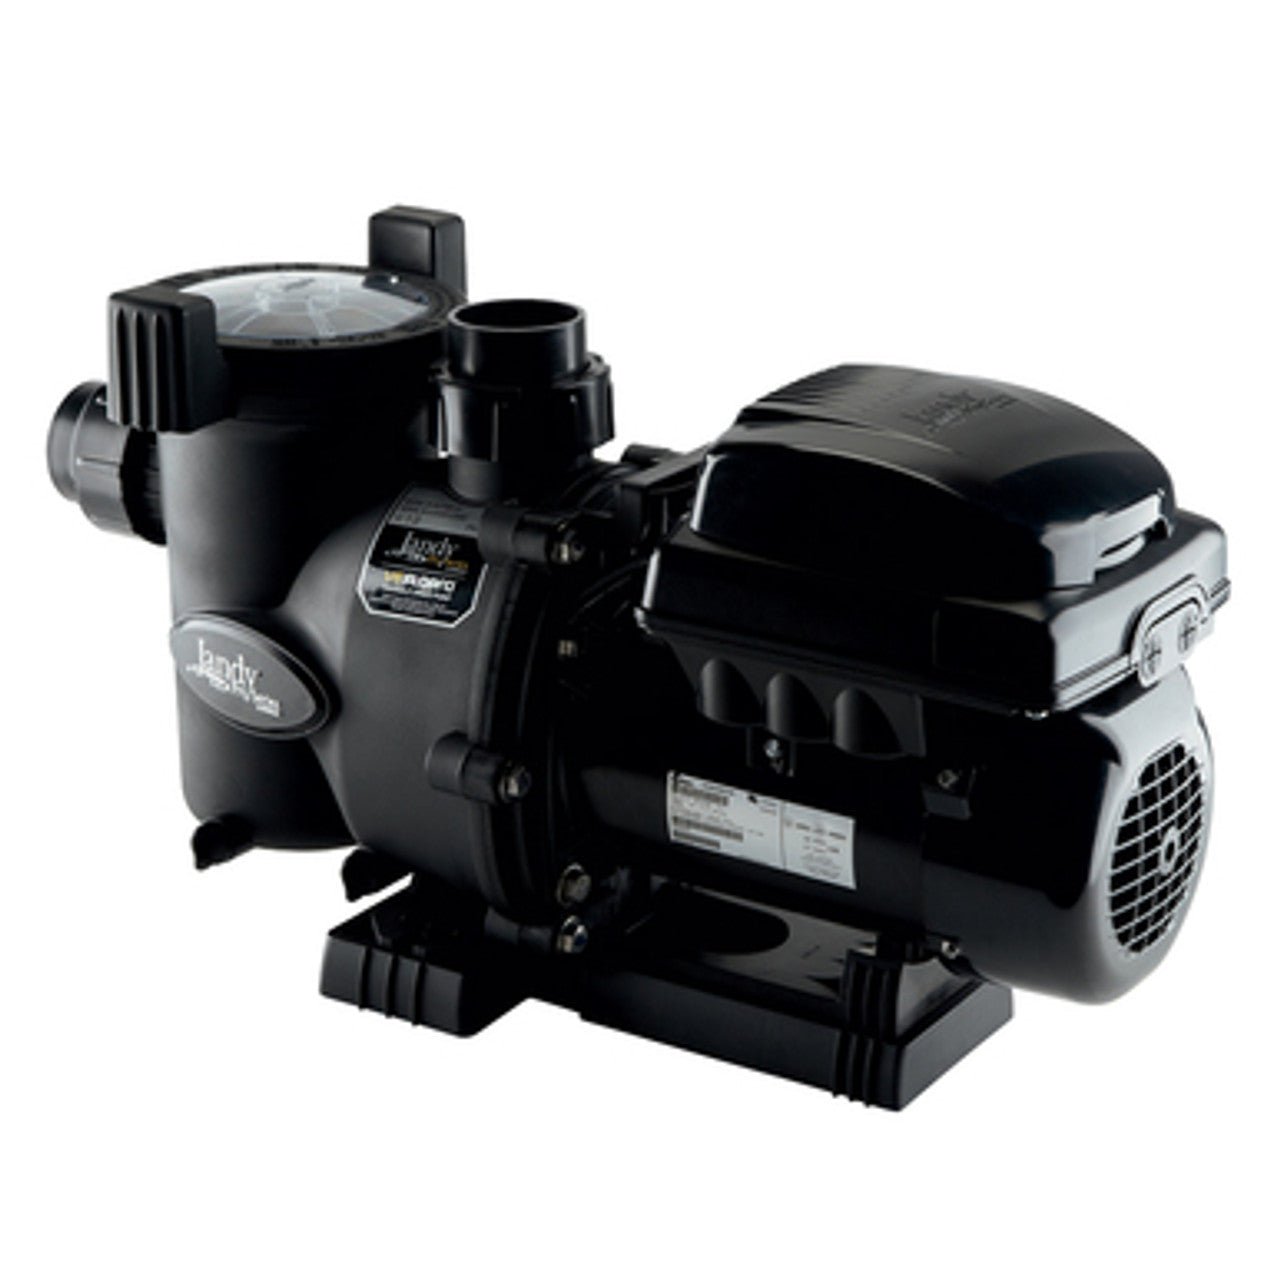 Jandy FloPro Variable Speed Pump .85HP 115V without Controller VSFHP085AUT - Variable Speed Pumps - img-1